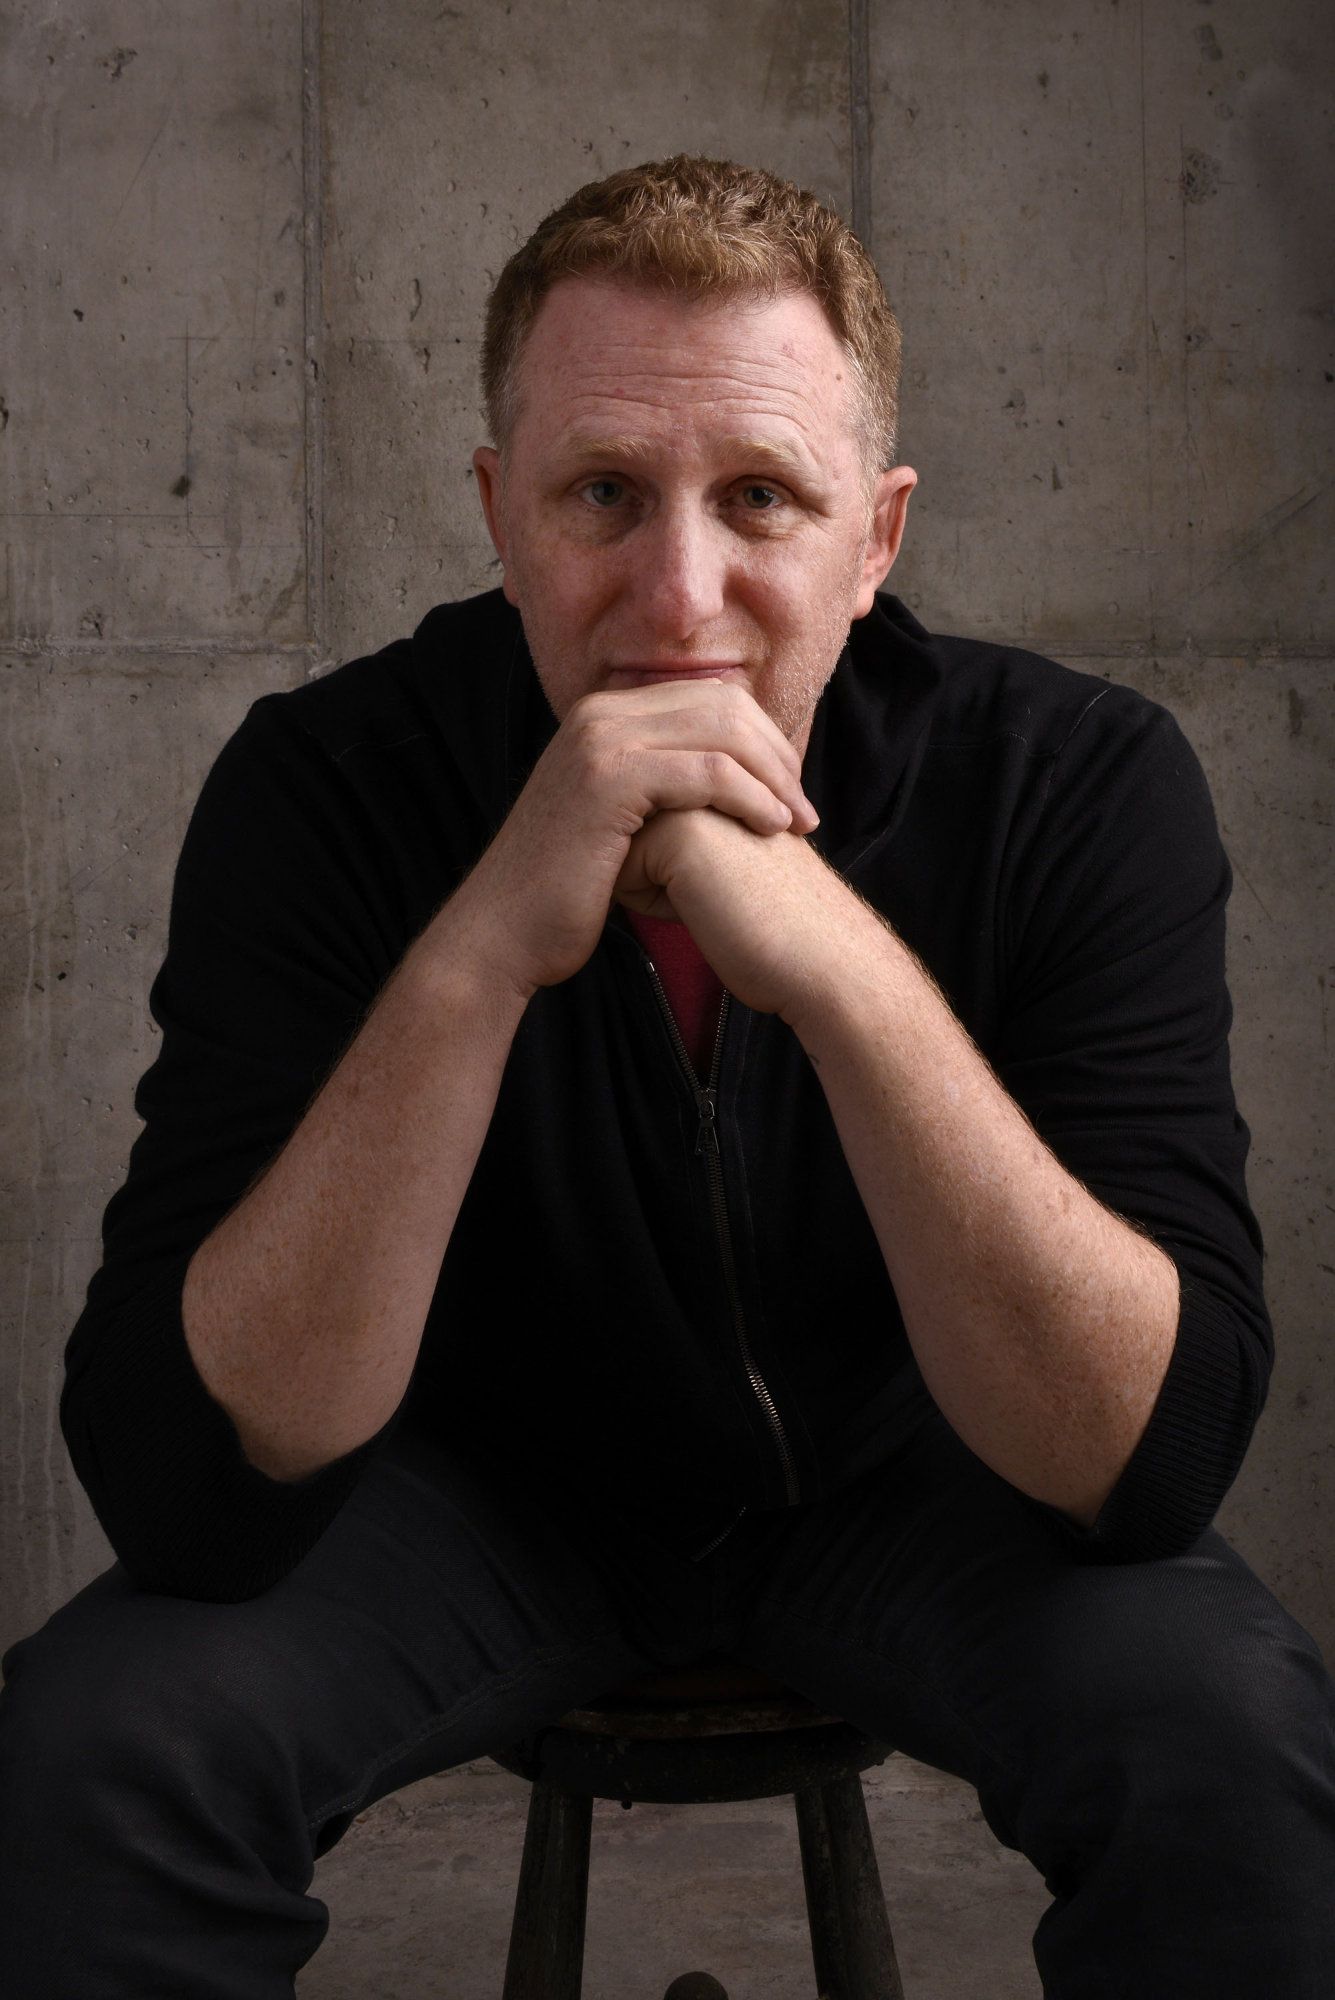 Pictures of Michael Rapaport